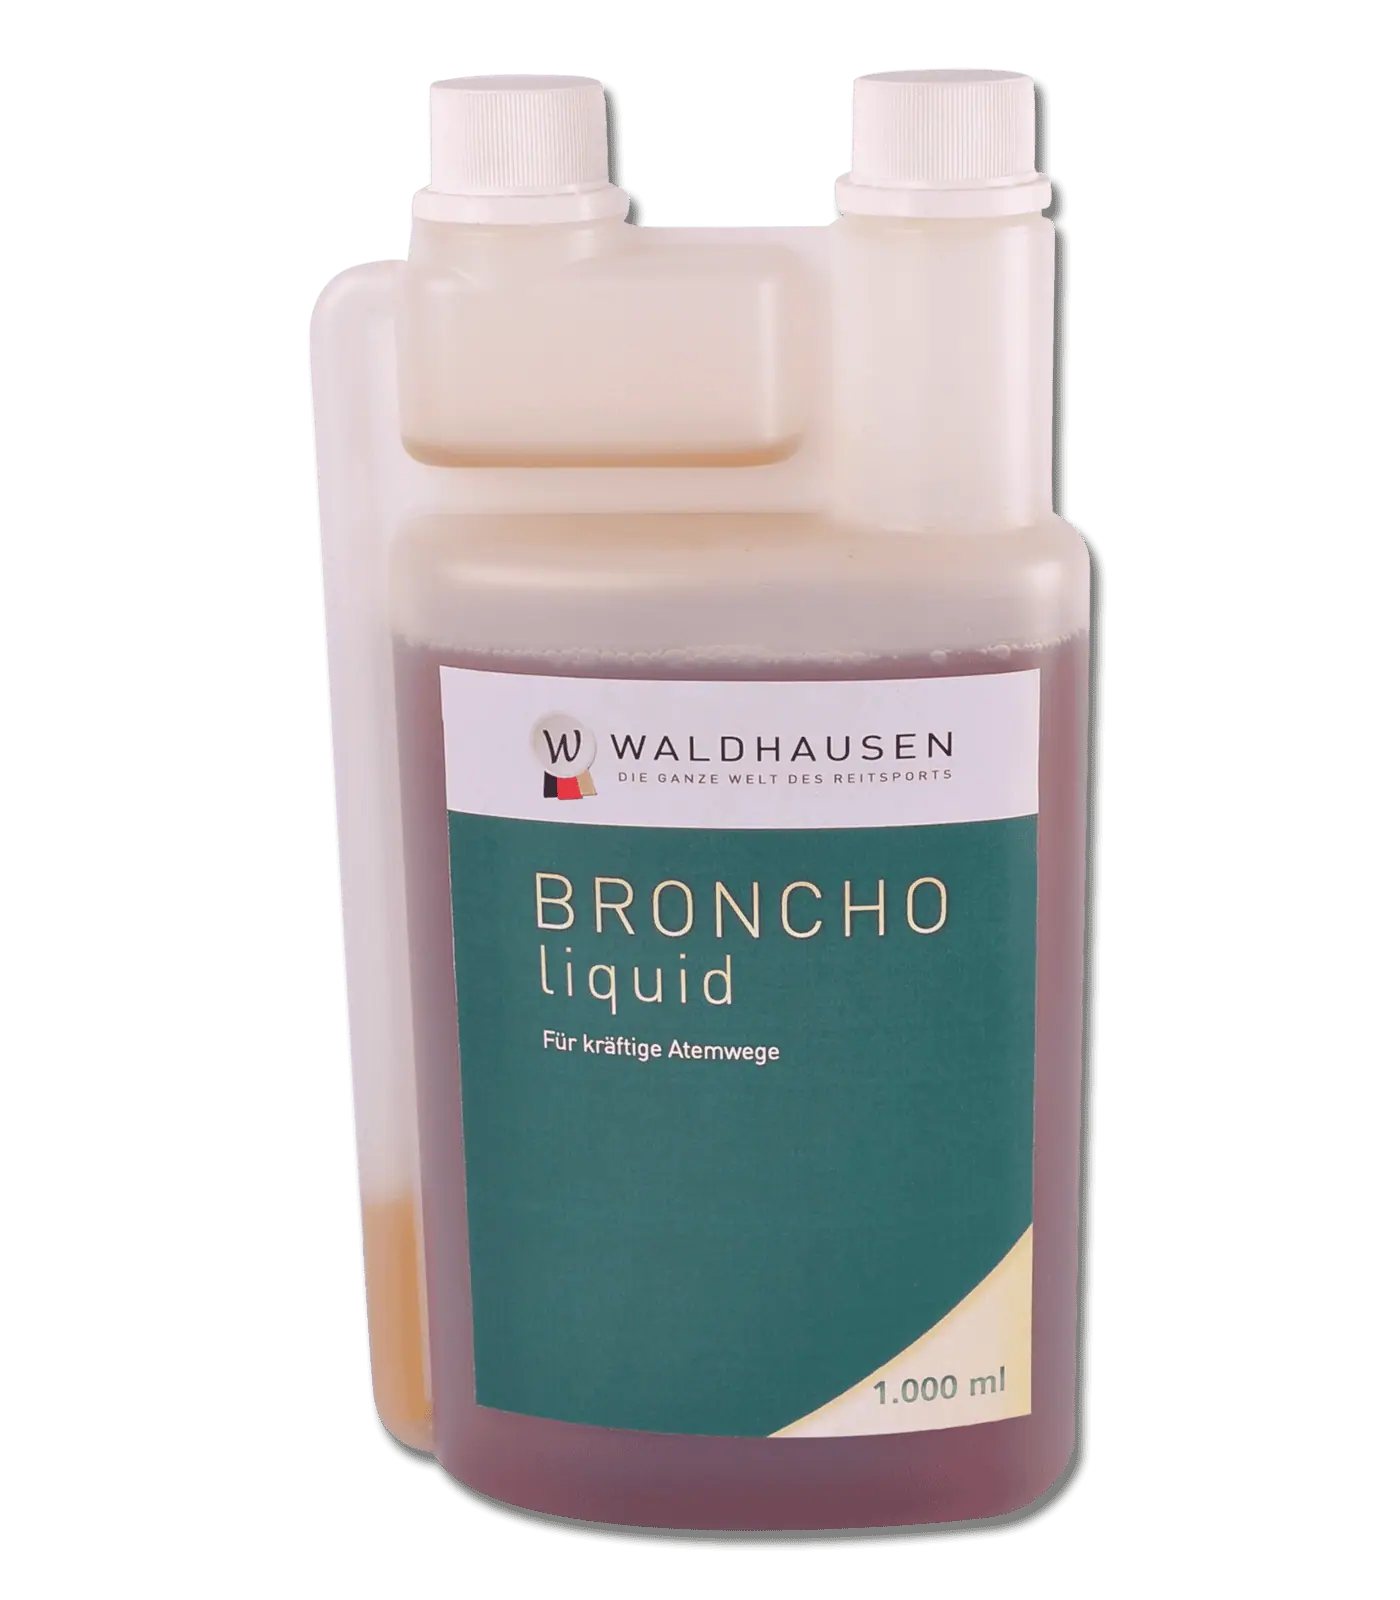 Broncho liquid - Good for the respiratory tract, 1l 